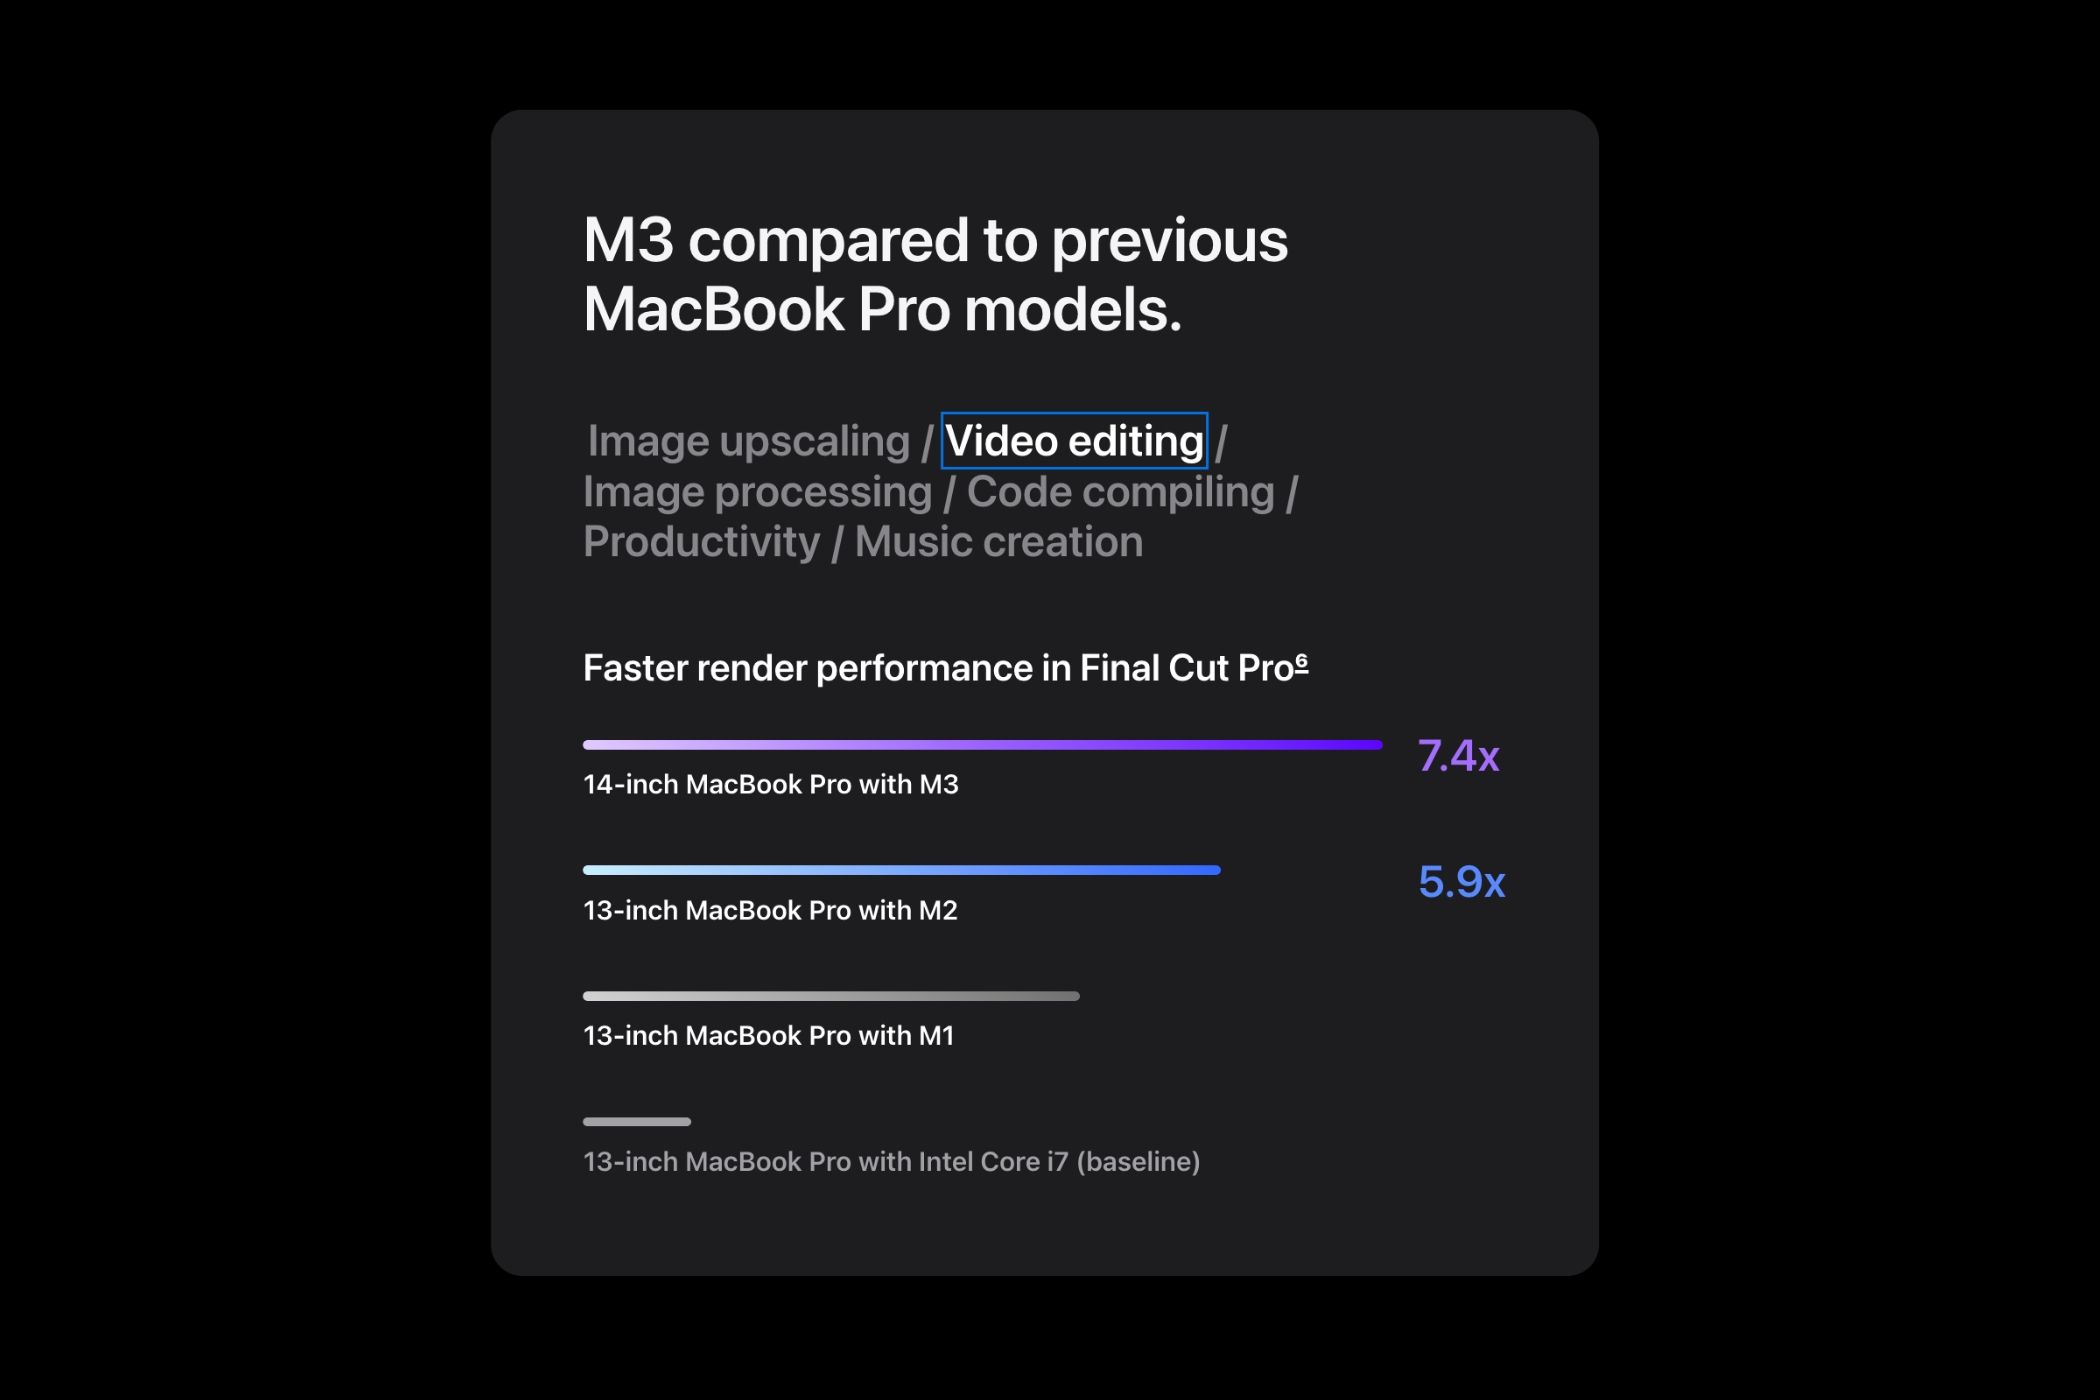 A comparison chart showcasing how fast is Apple's M3 chipset compared to older models